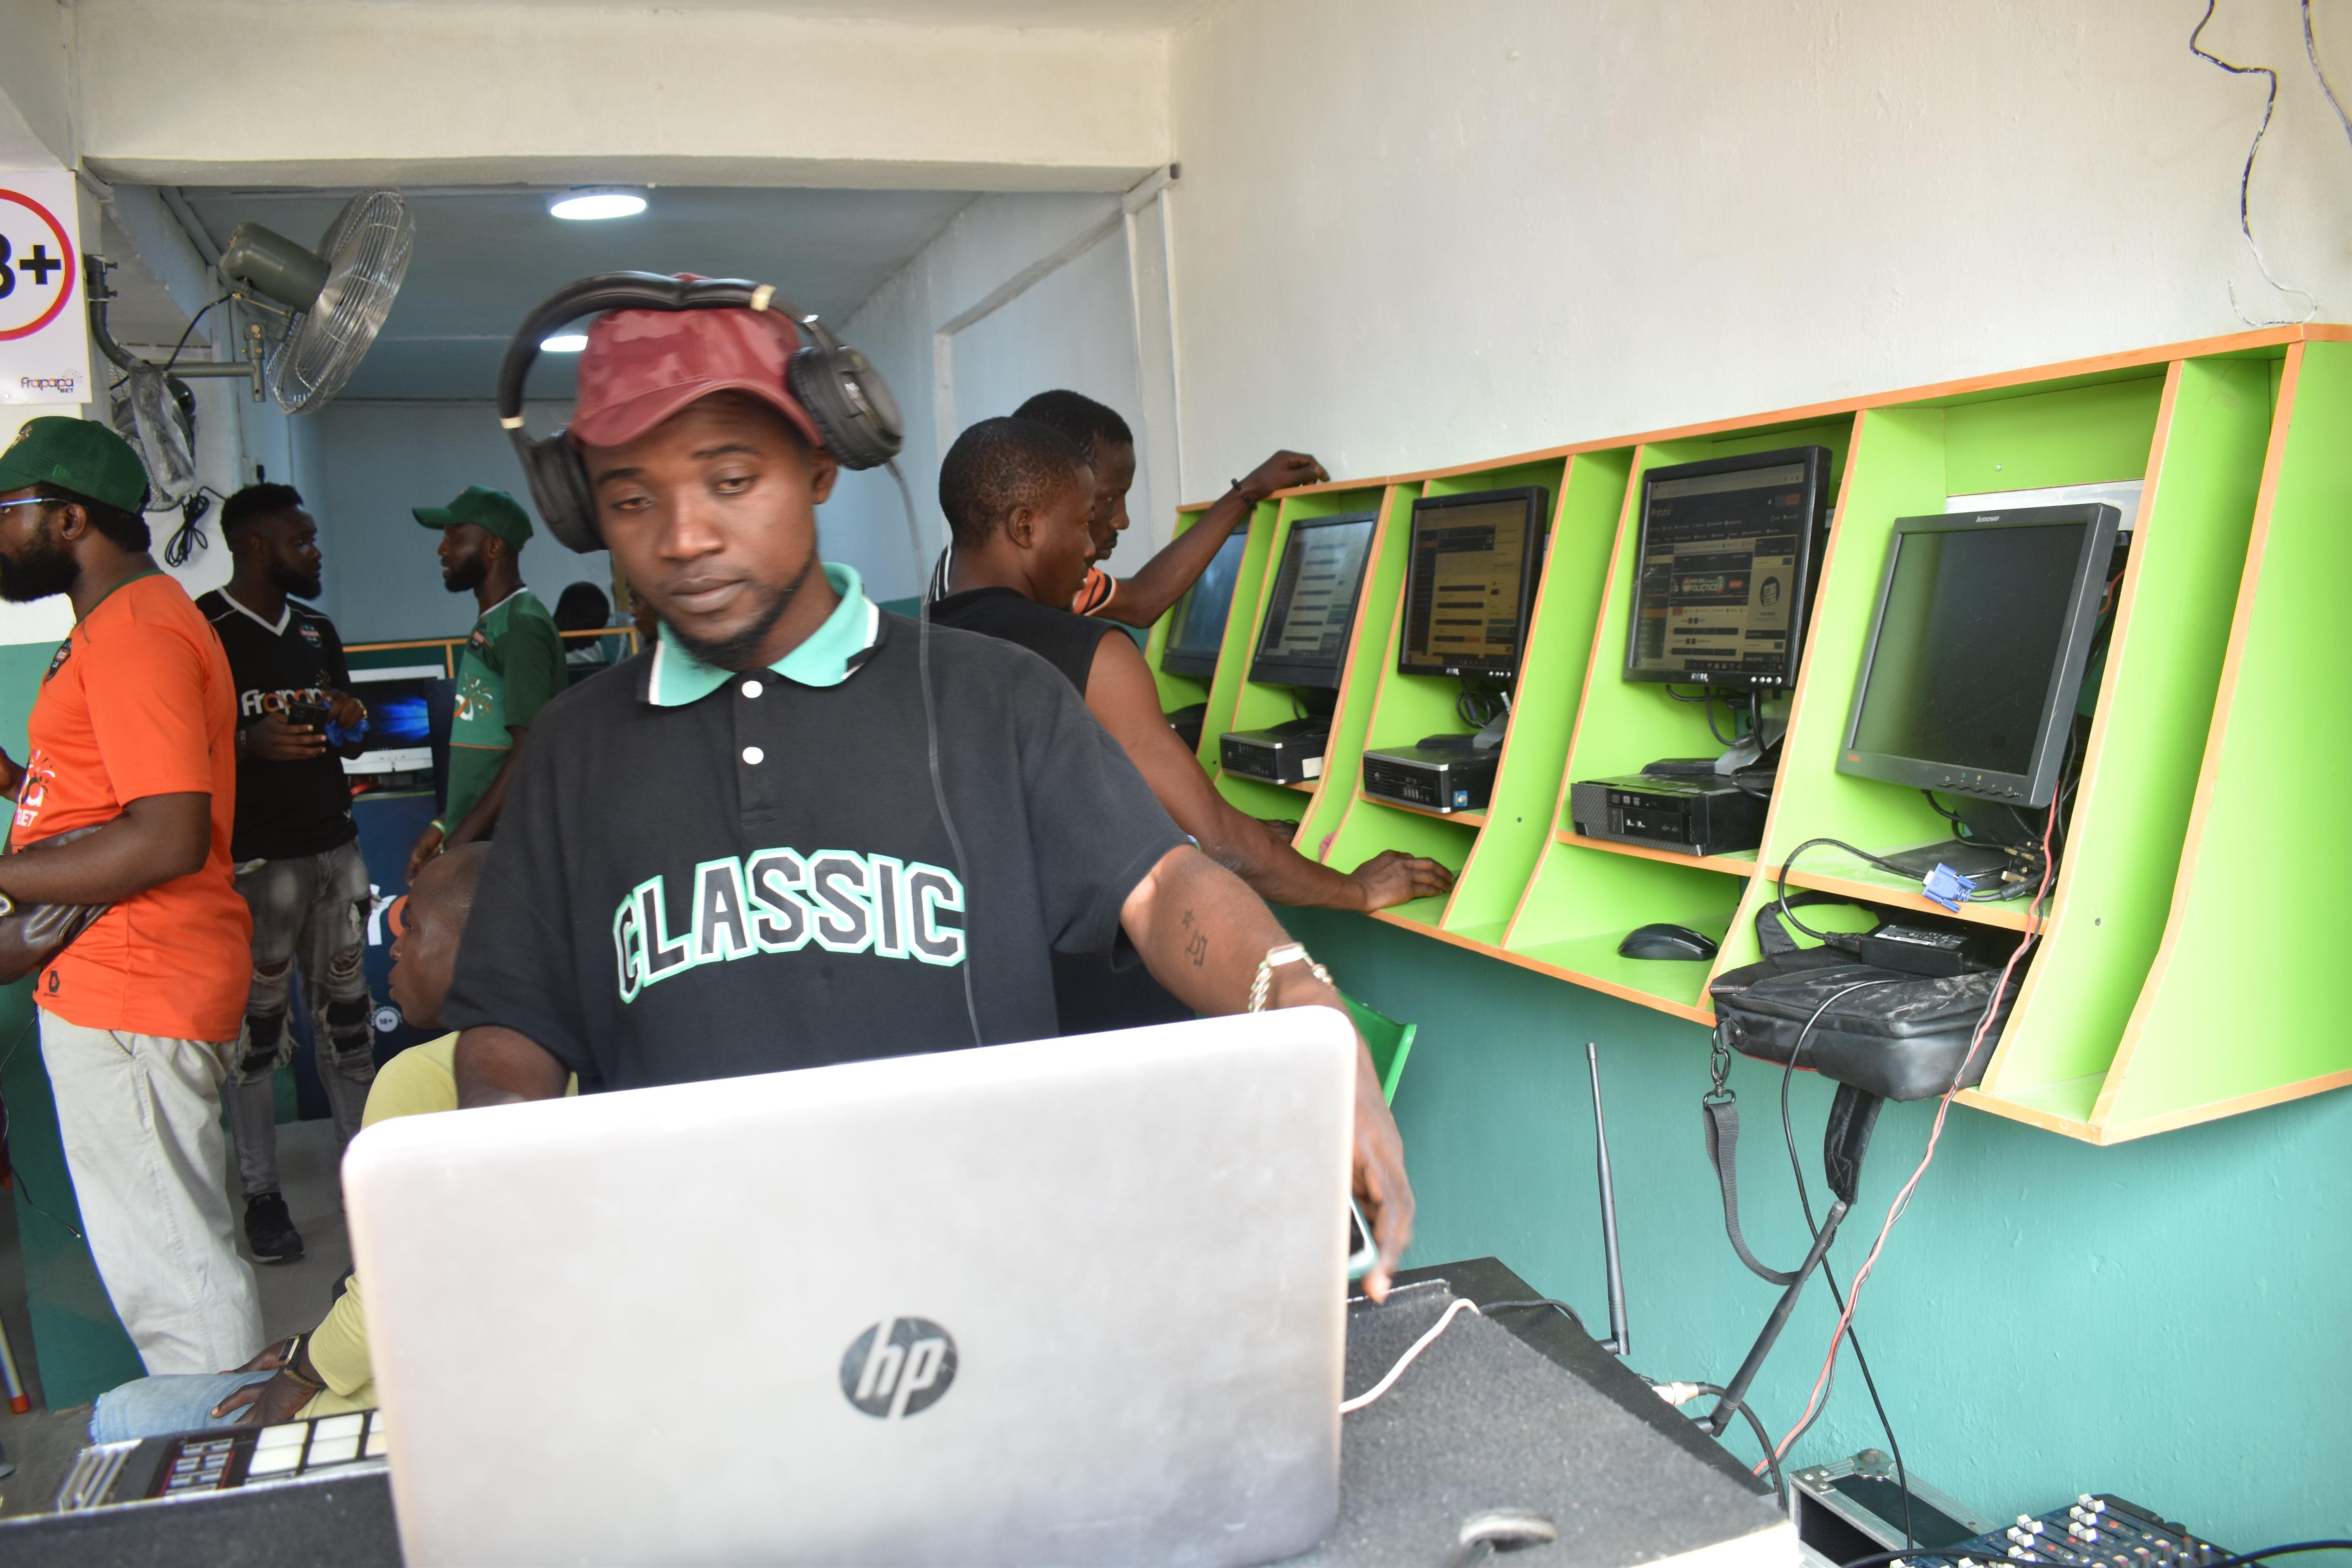 Frapapa opens new betting shops in Lagos